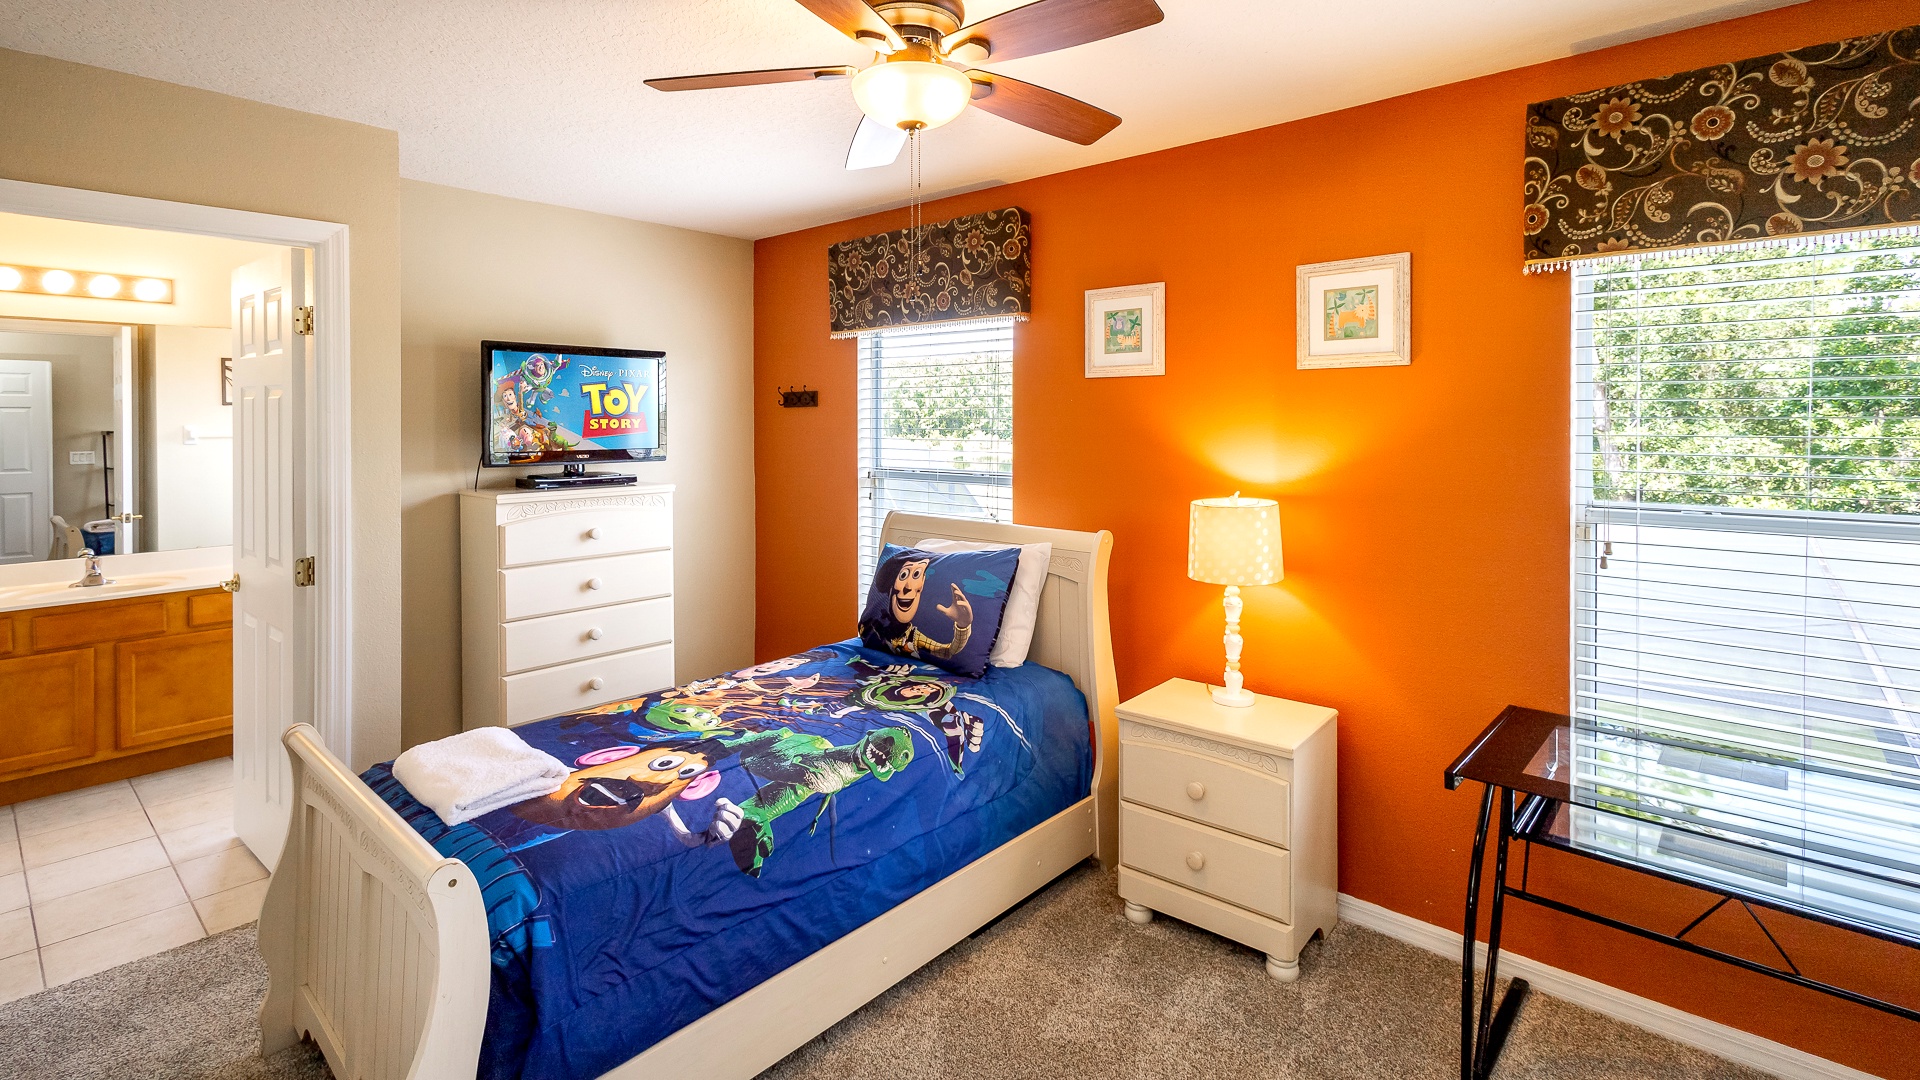 This twin bedroom includes a Jack and Jill bathroom, ceiling fan, & desk